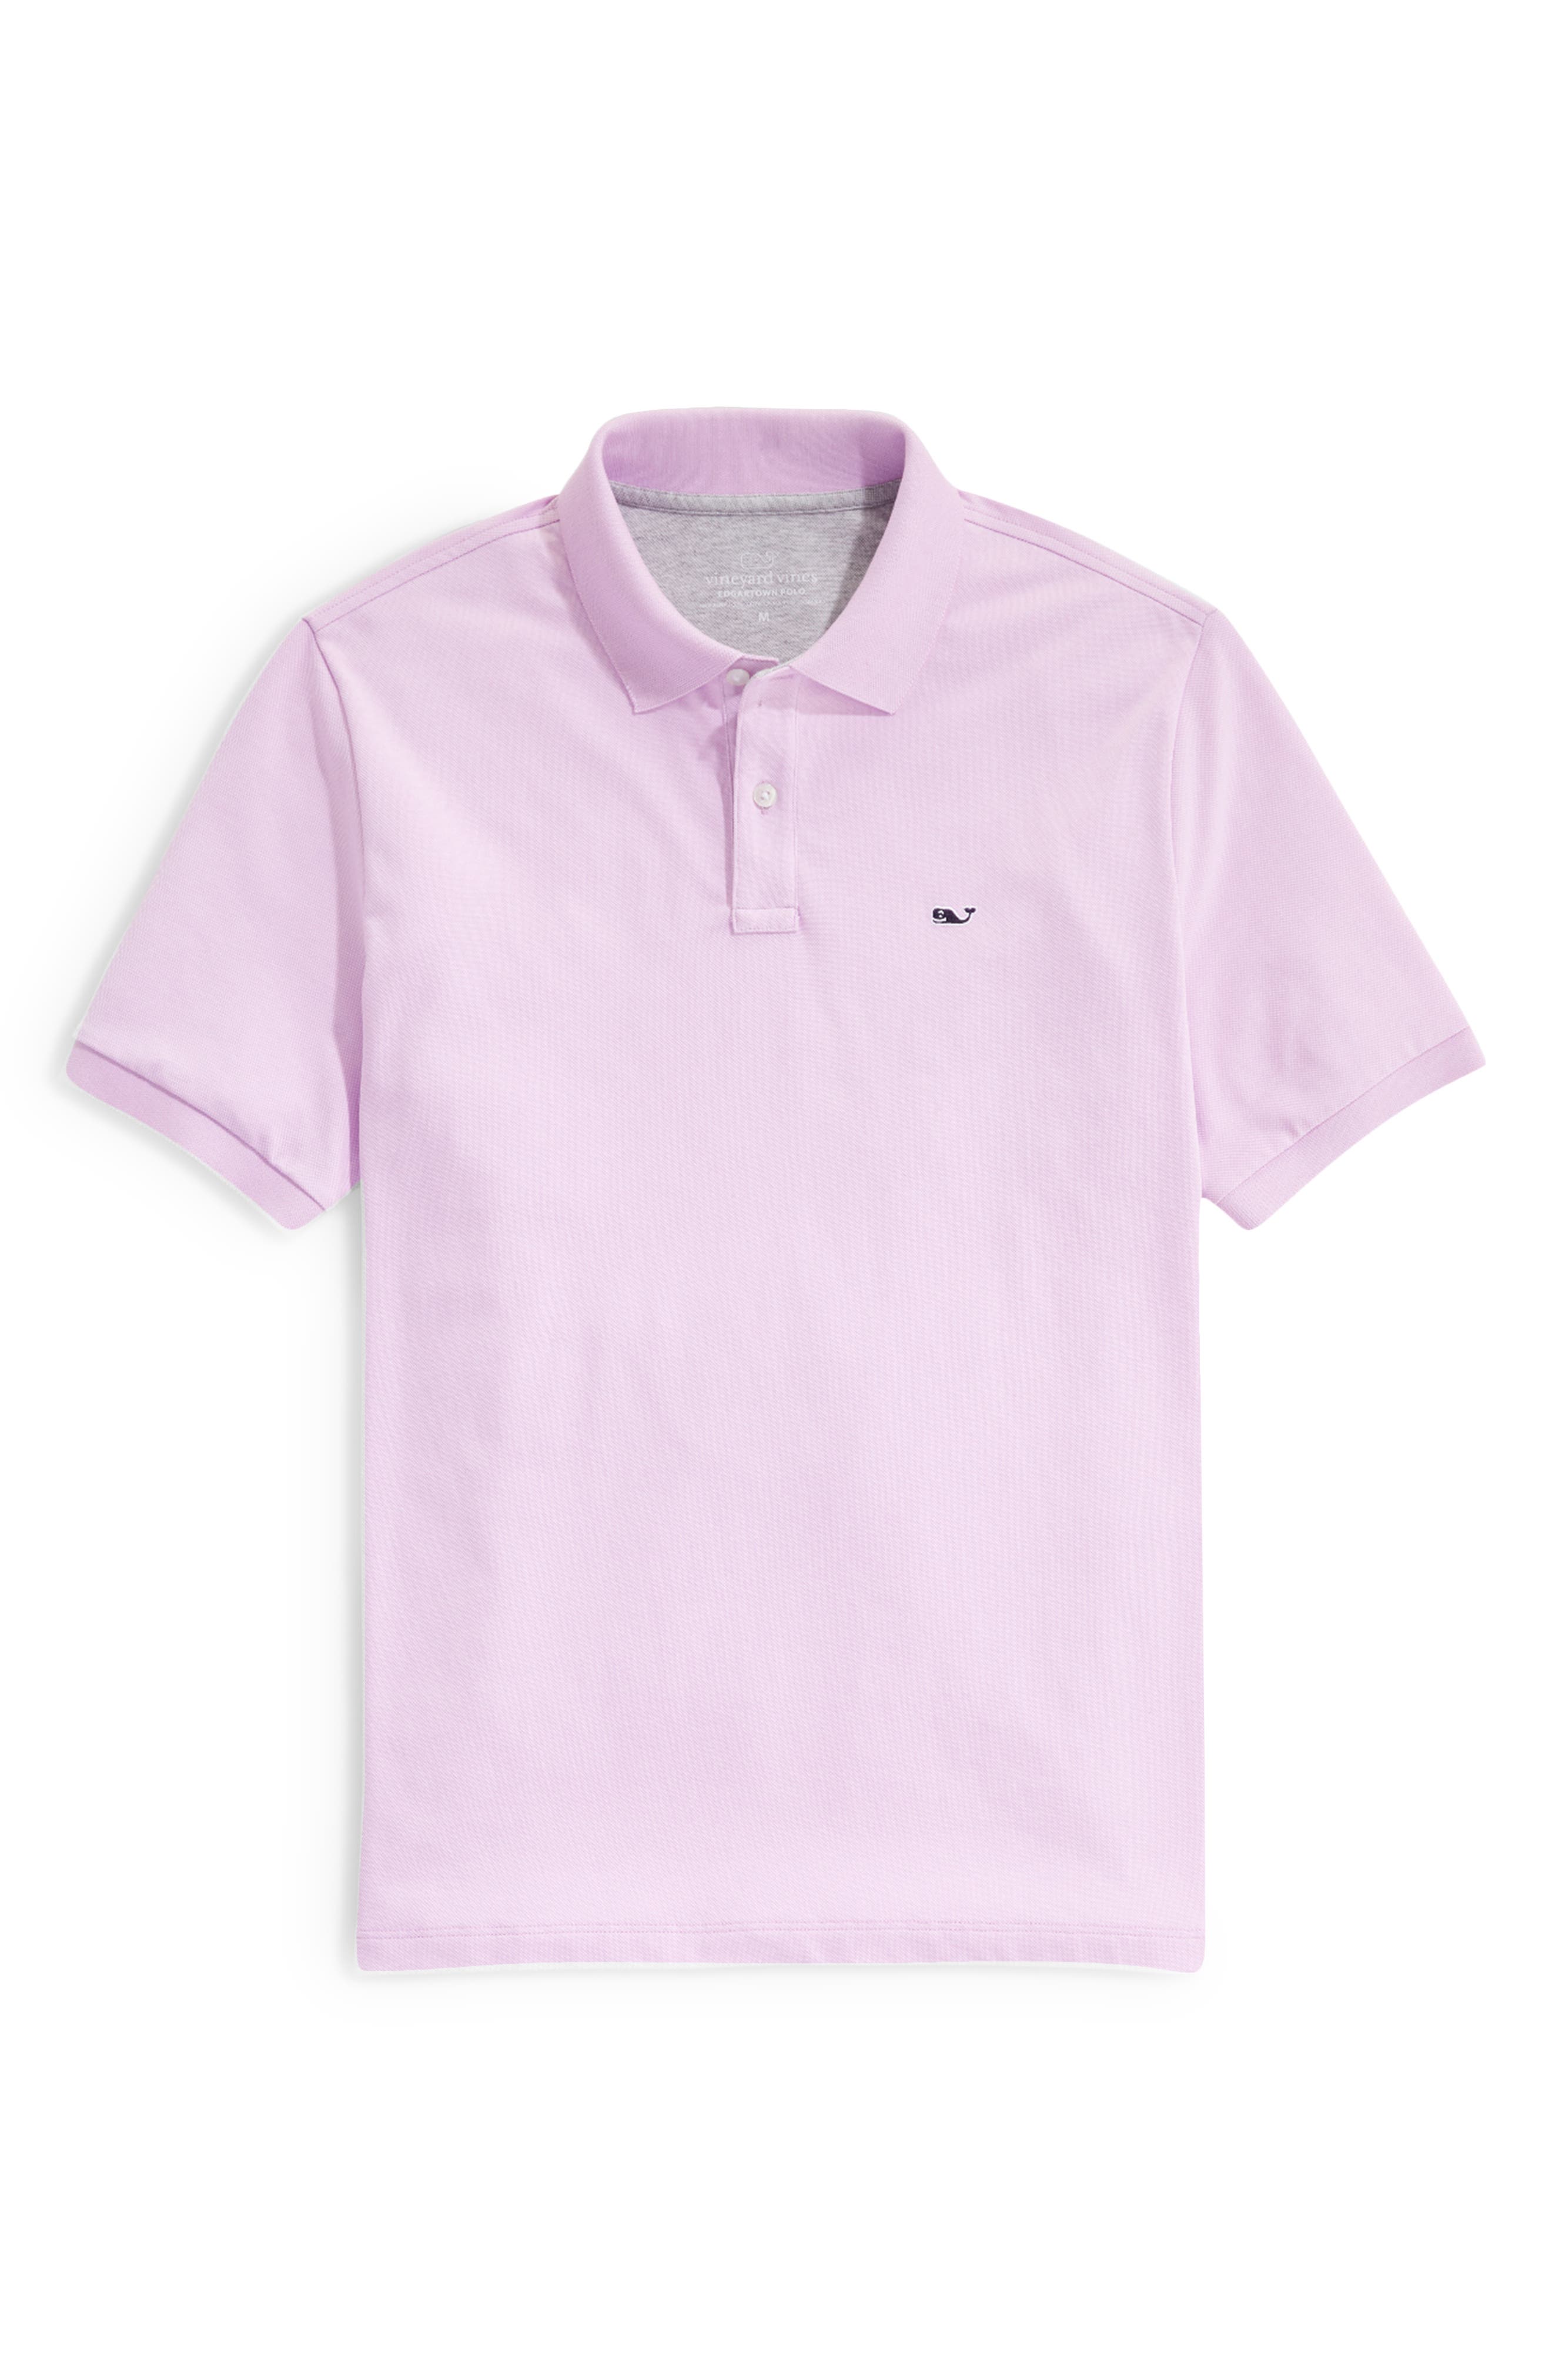 Vineyard Vines Edgartown Pique Performance Polo In Crocus At Nordstrom, Size X-large Us